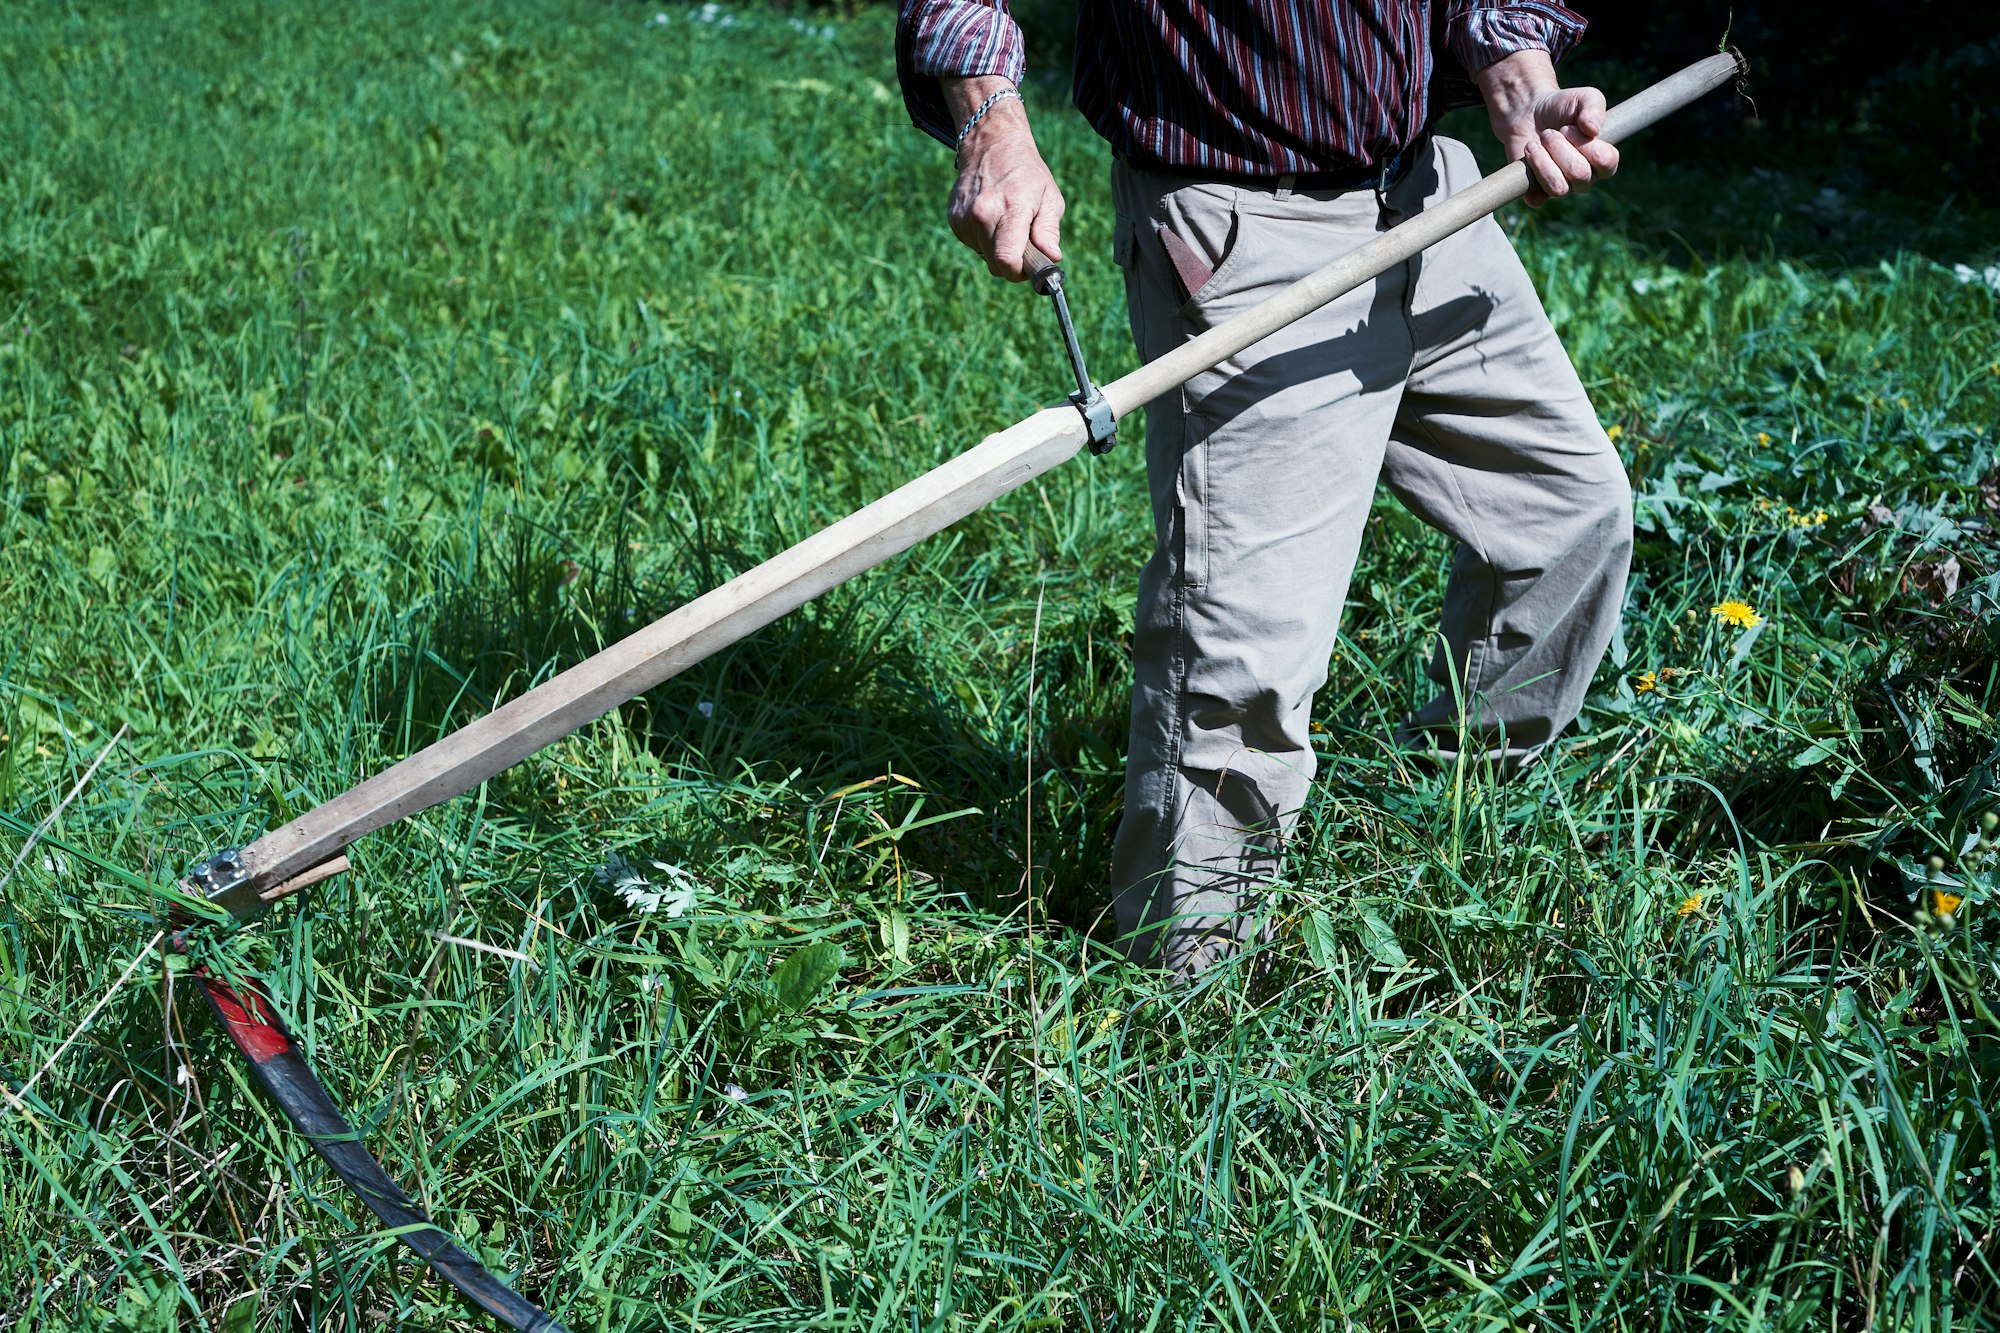 Lawn Mowing  : Tips To Consider When Choosing The Right Time To Stop  For The Year